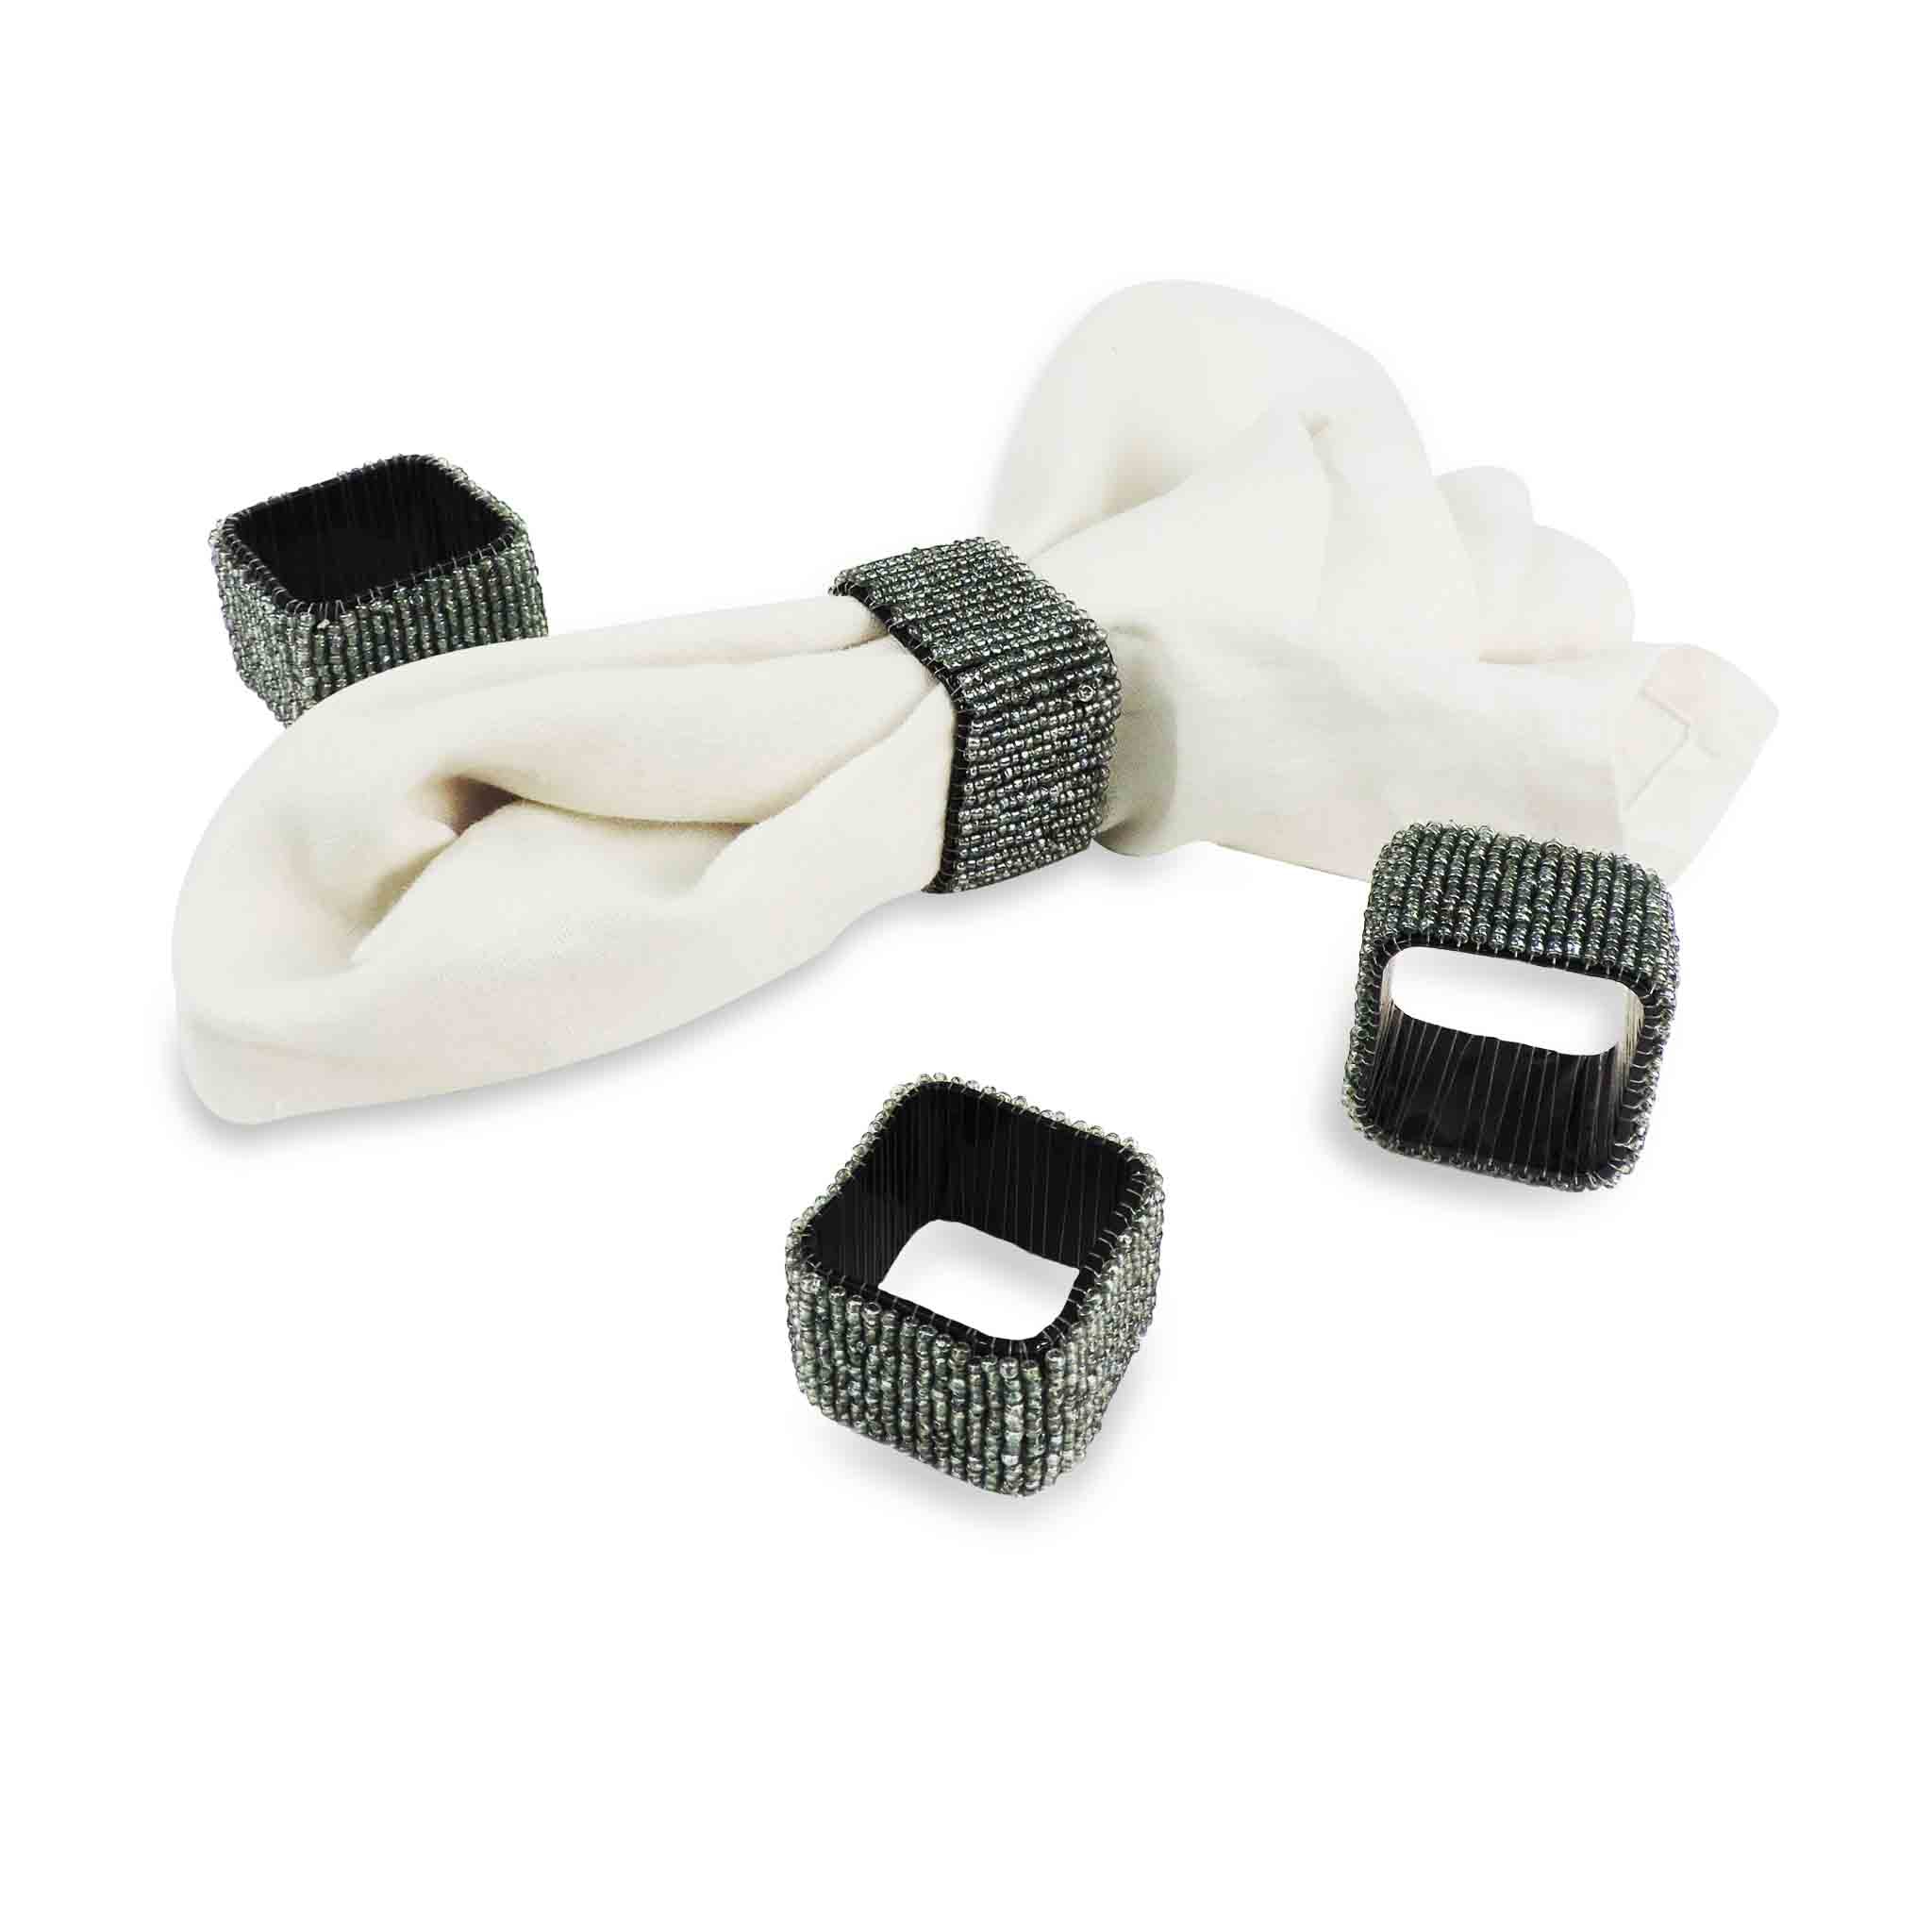 Classic Square Napkin Ring in Green, Set of 4